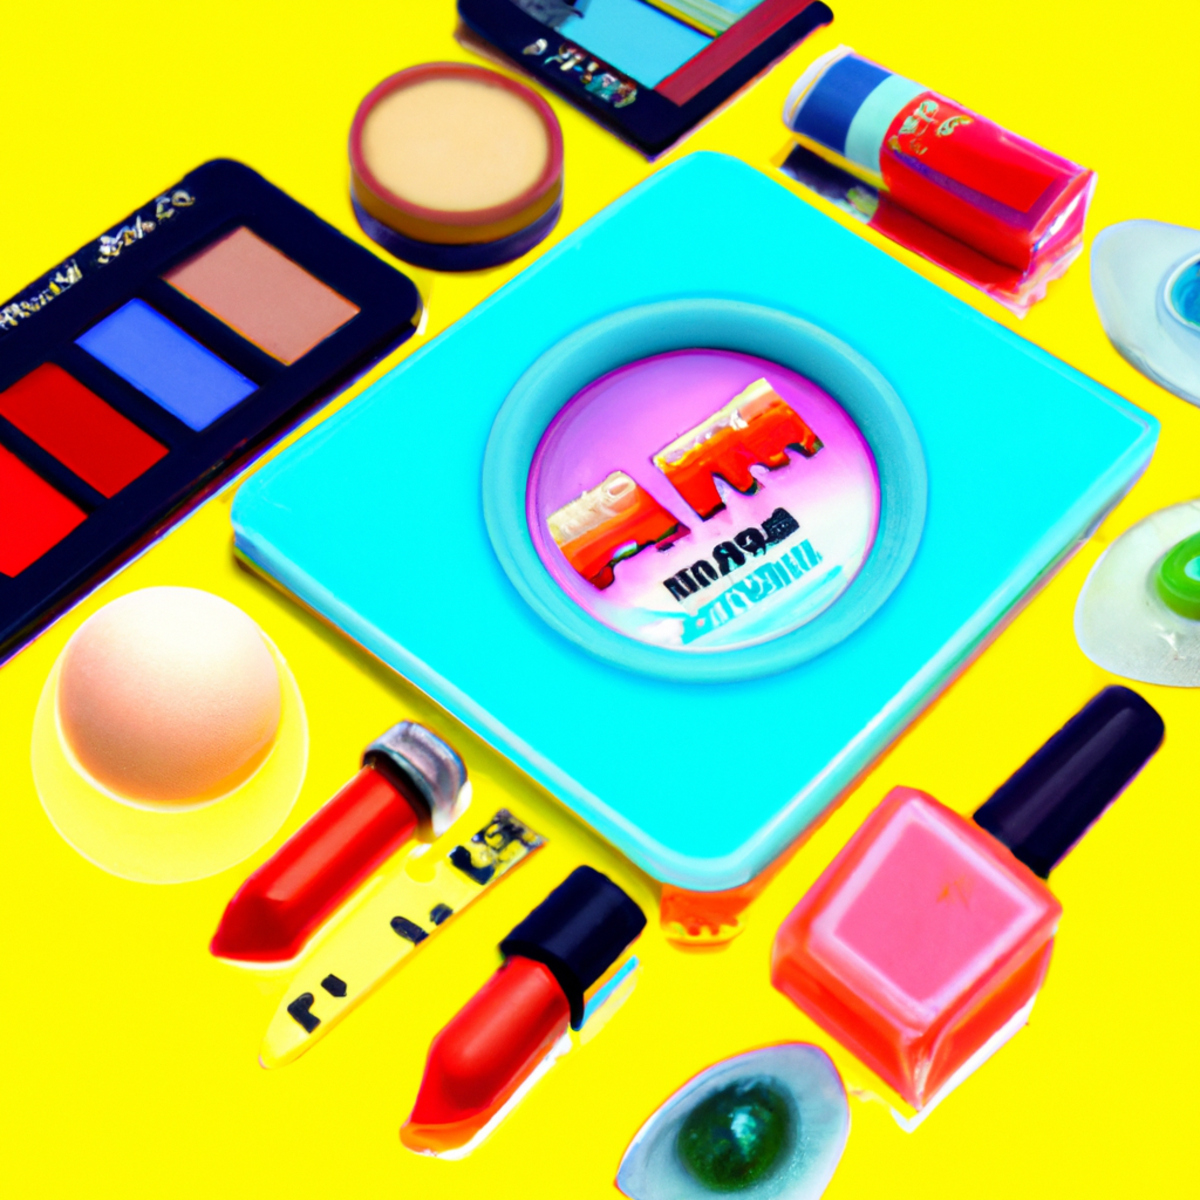 Vibrant neon makeup products arranged on reflective surface, capturing mesmerizing play of light and color.